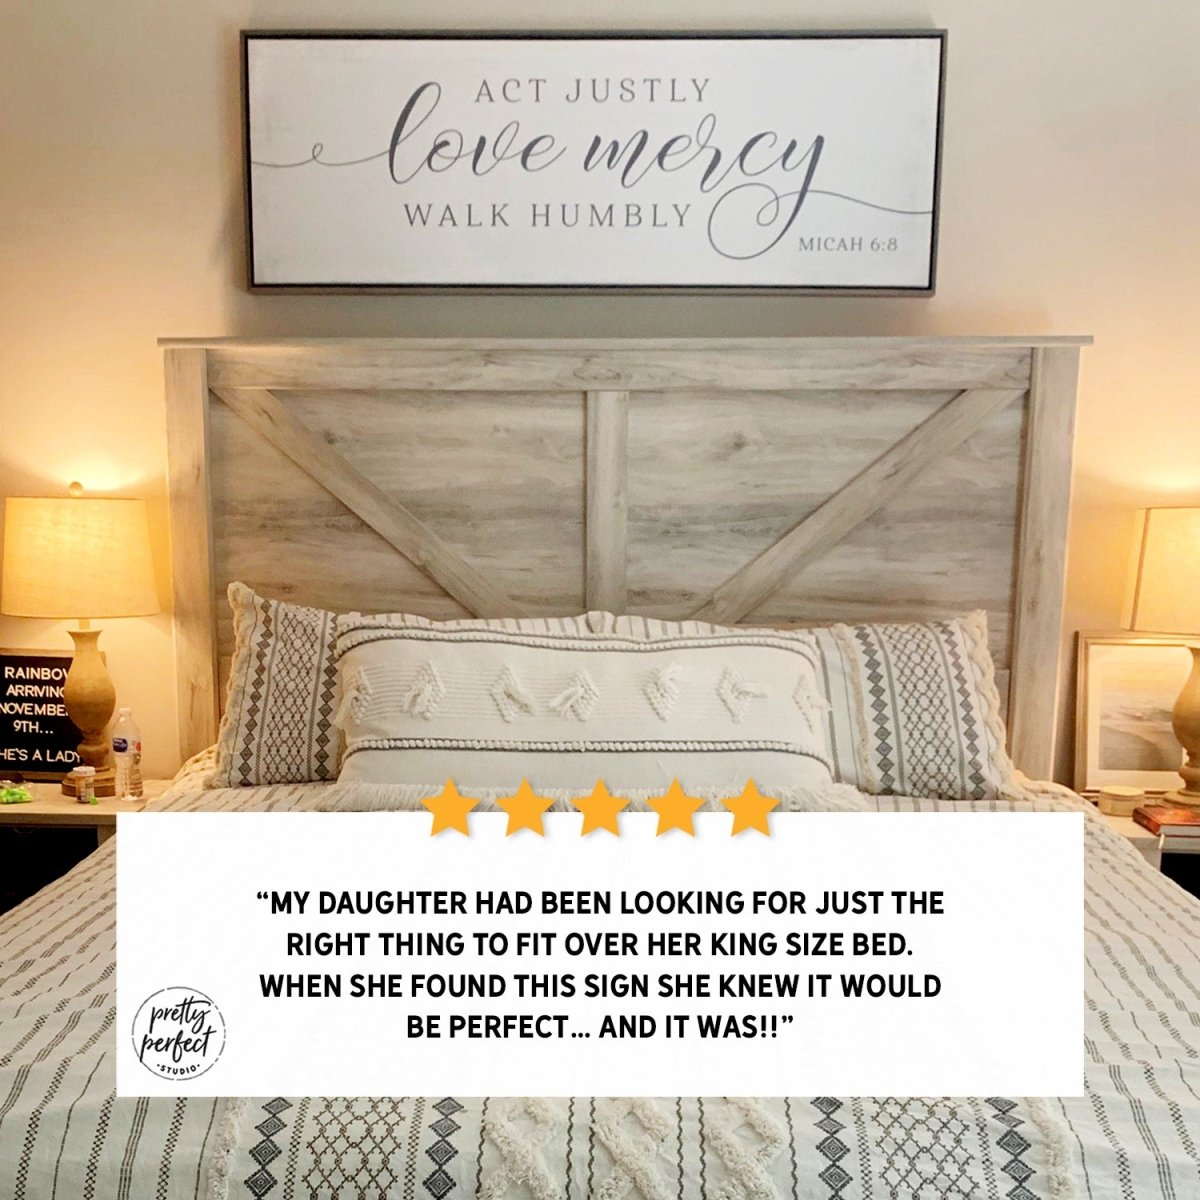 Customer product review for act justly love mercy walk humbly sign by Pretty Perfect Studio